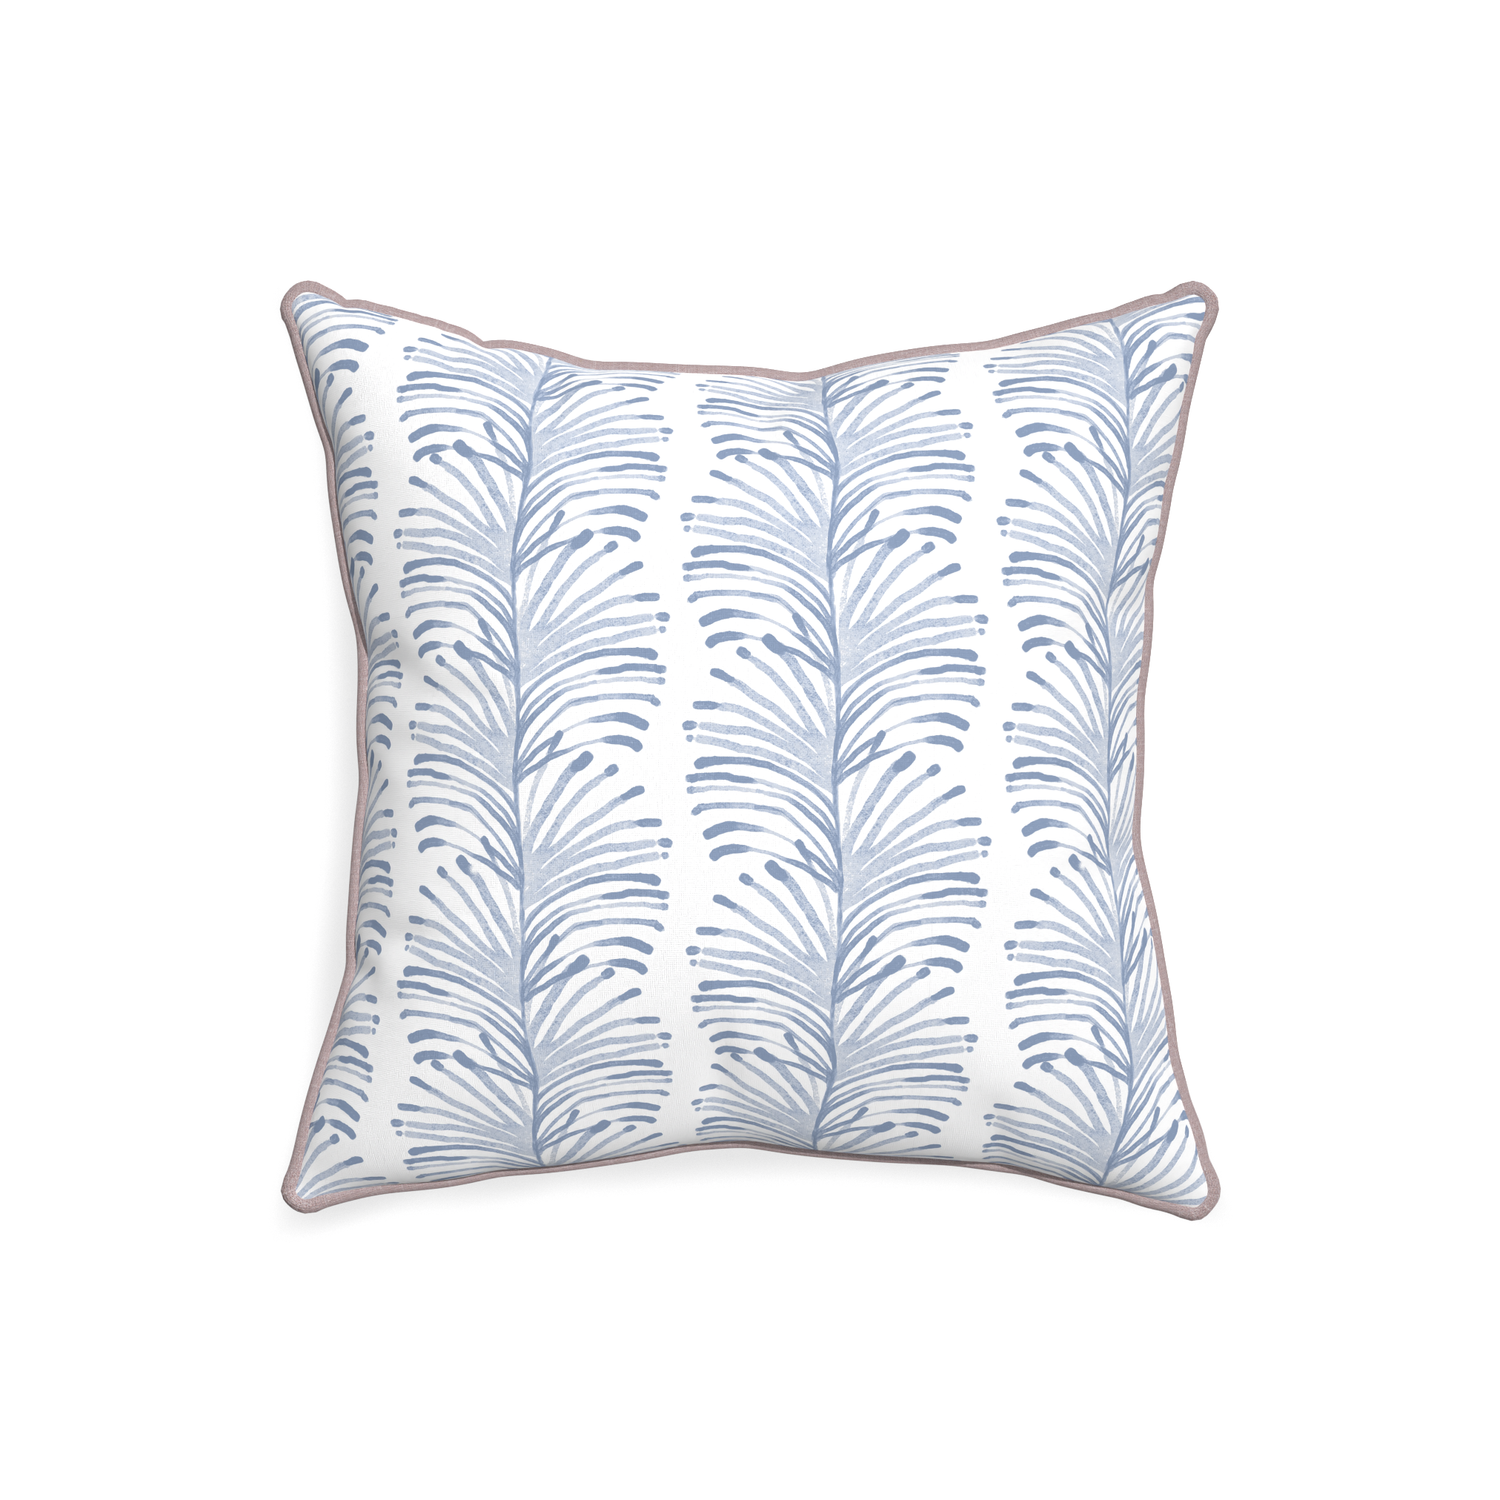 20-square emma sky custom sky blue botanical stripepillow with orchid piping on white background